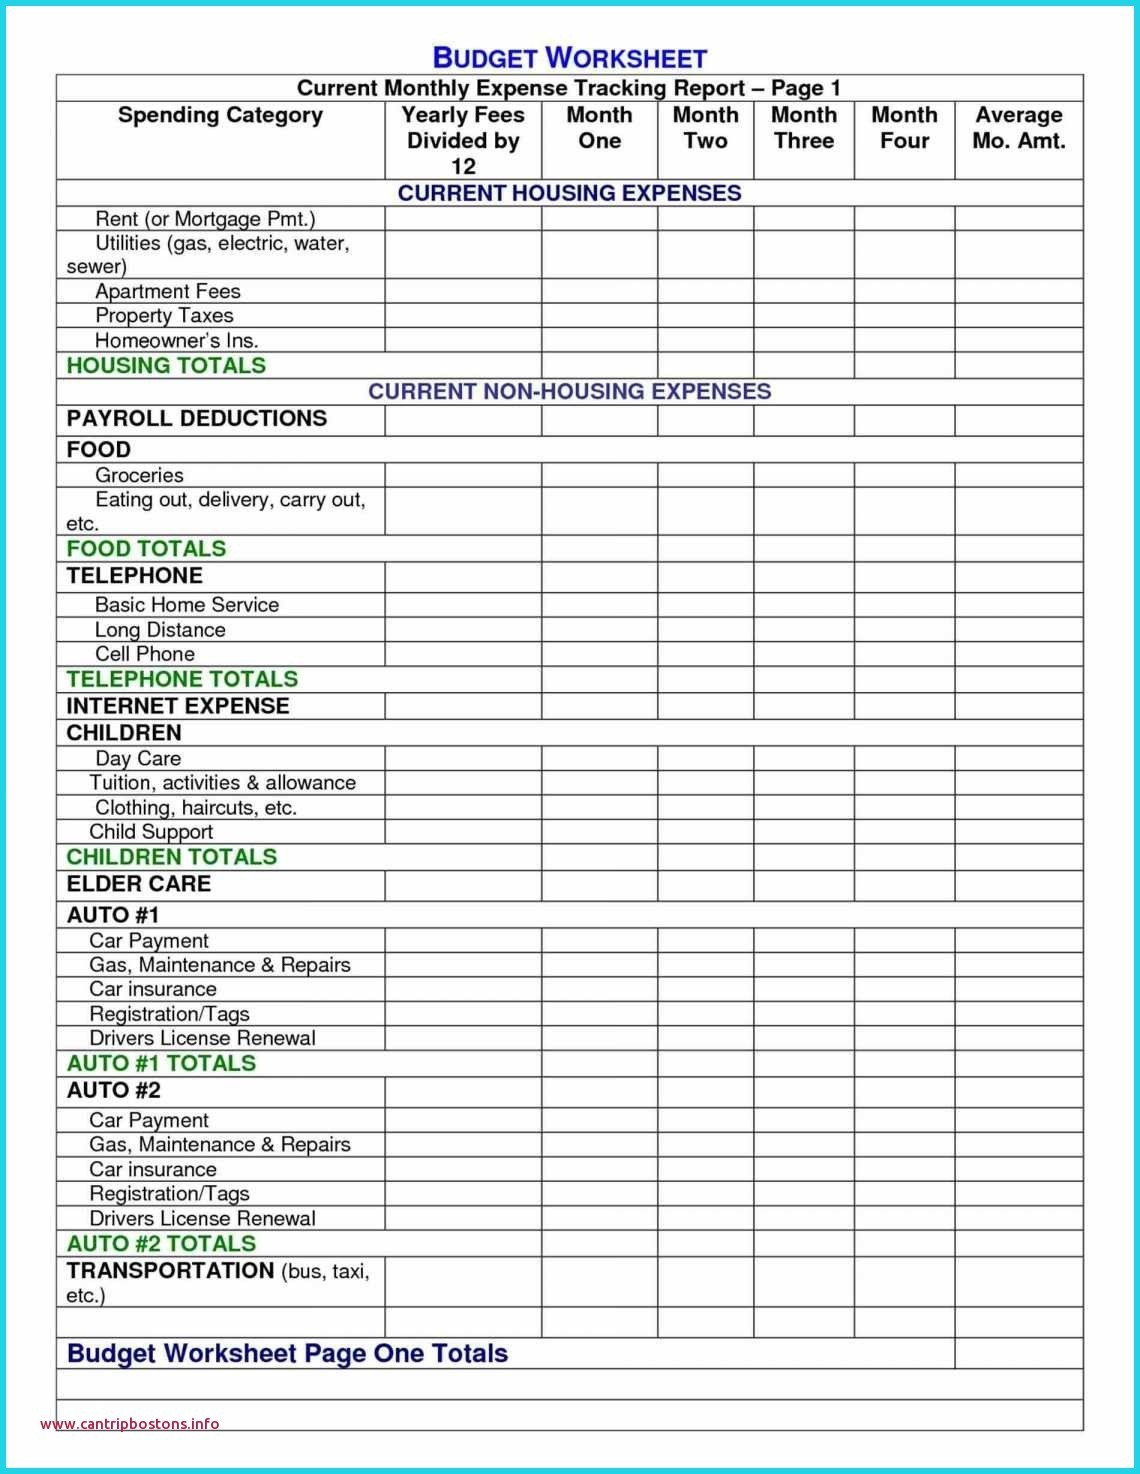 Real Estate Agent Accounting Spreadsheet With Real Estate Agent Accounting Spreadsheet  Kayakmedia.ca